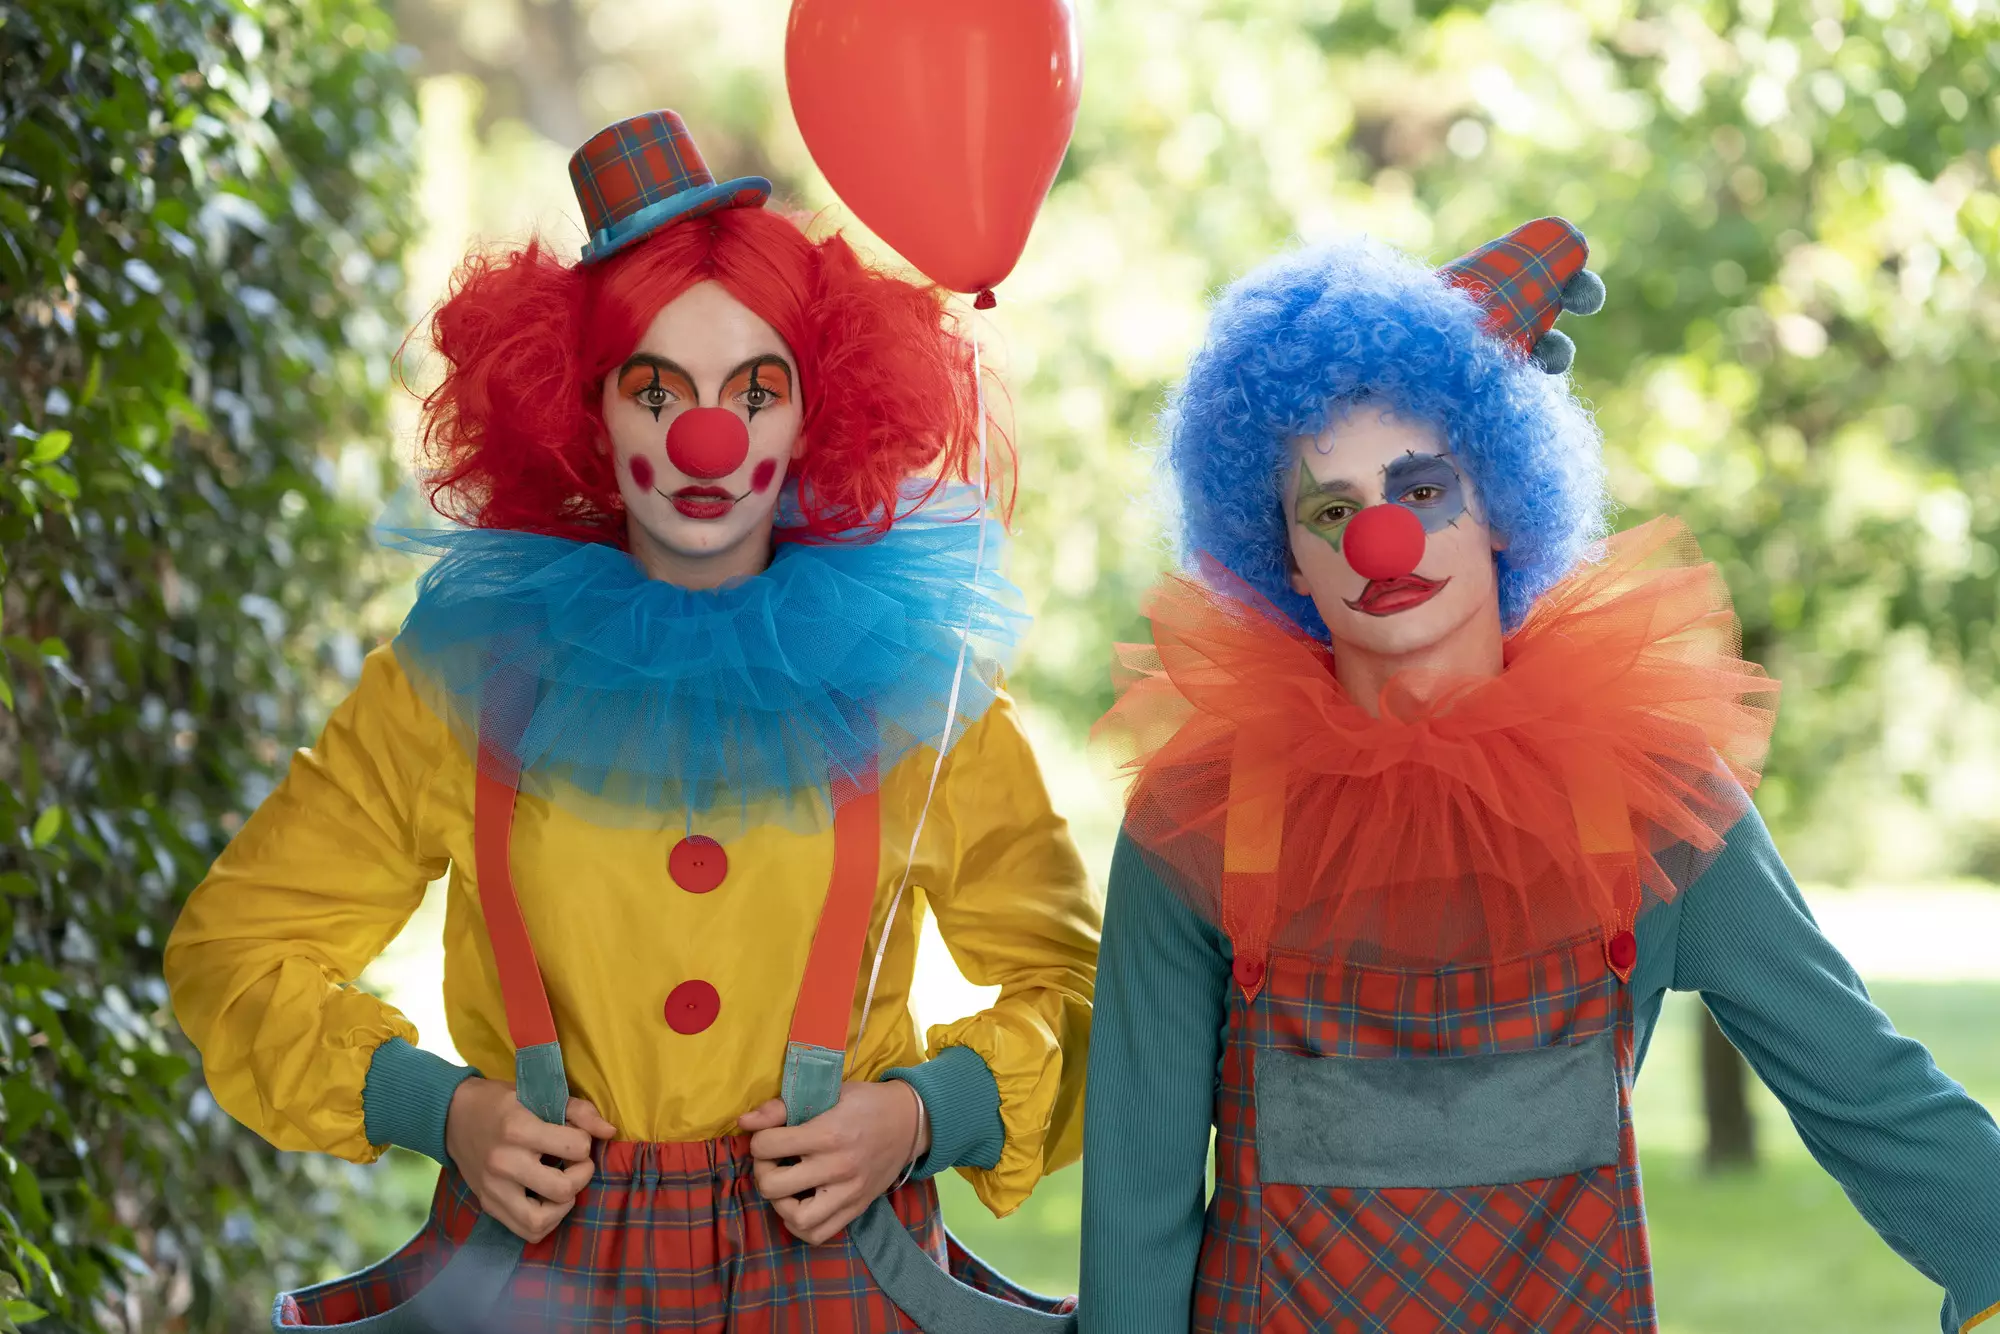 Villanelle can be seen dressed as a clown in the Series 3 trailer (